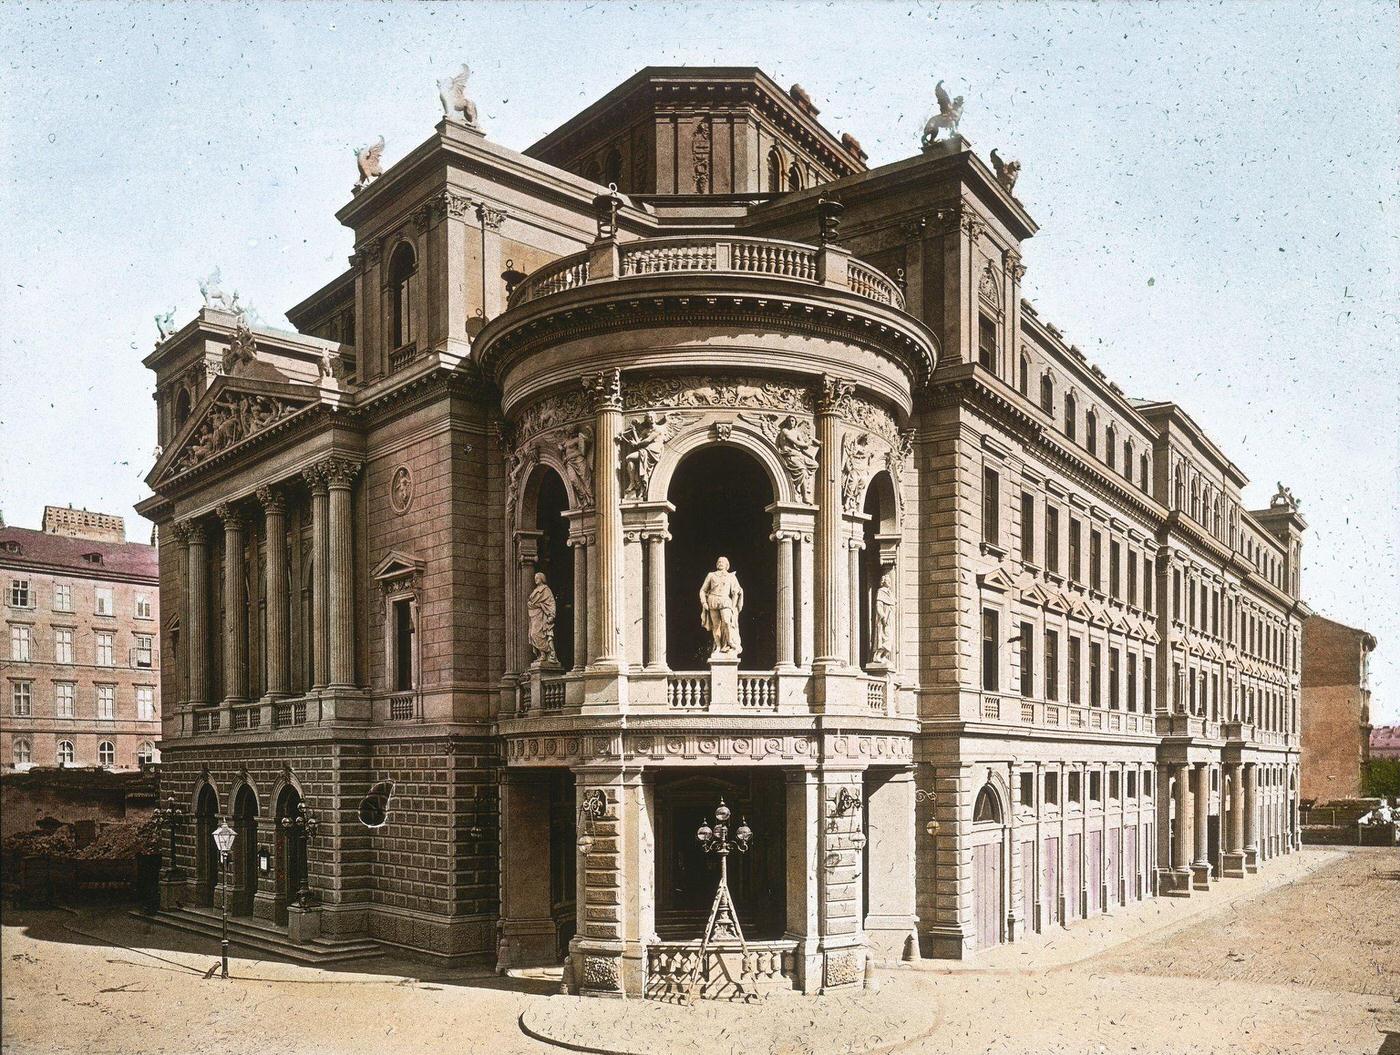 The Stadttheater, built in 1871/72, destroyed by fire in 1884, and rebuilt as the Etablissement Ronacher in 1887